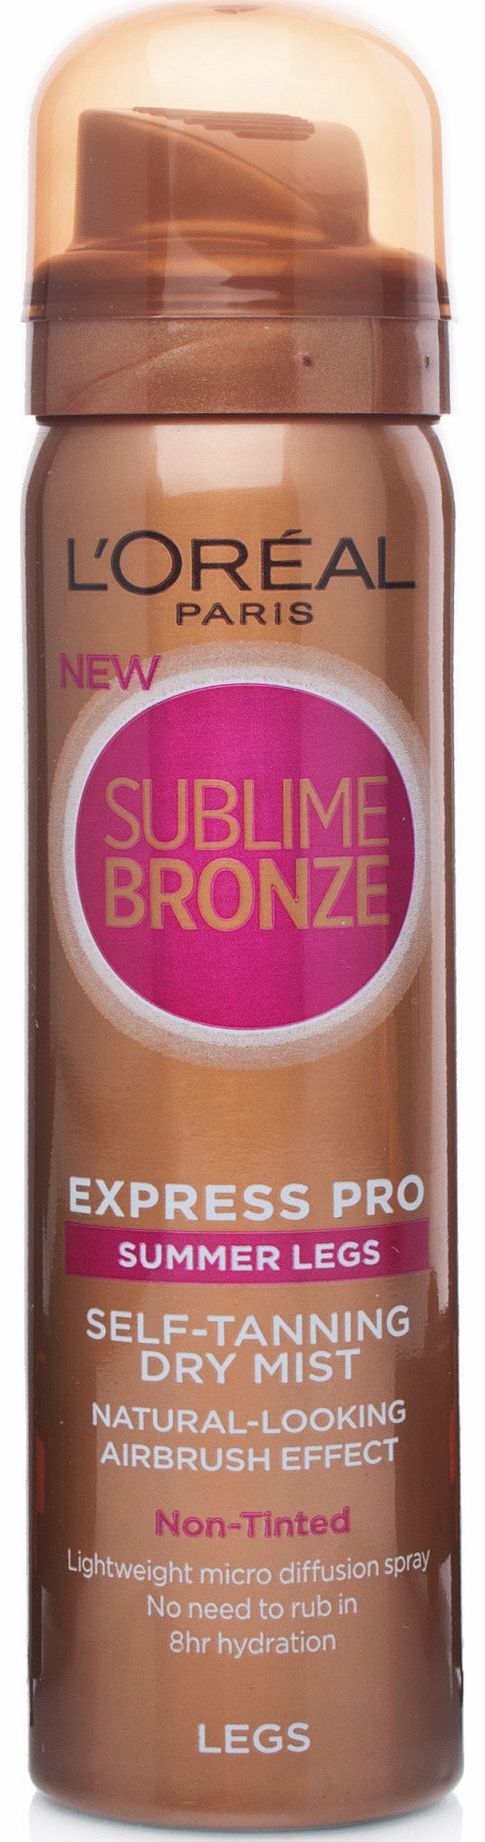 L'Oreal Sublime Bronze Express Pro Summer